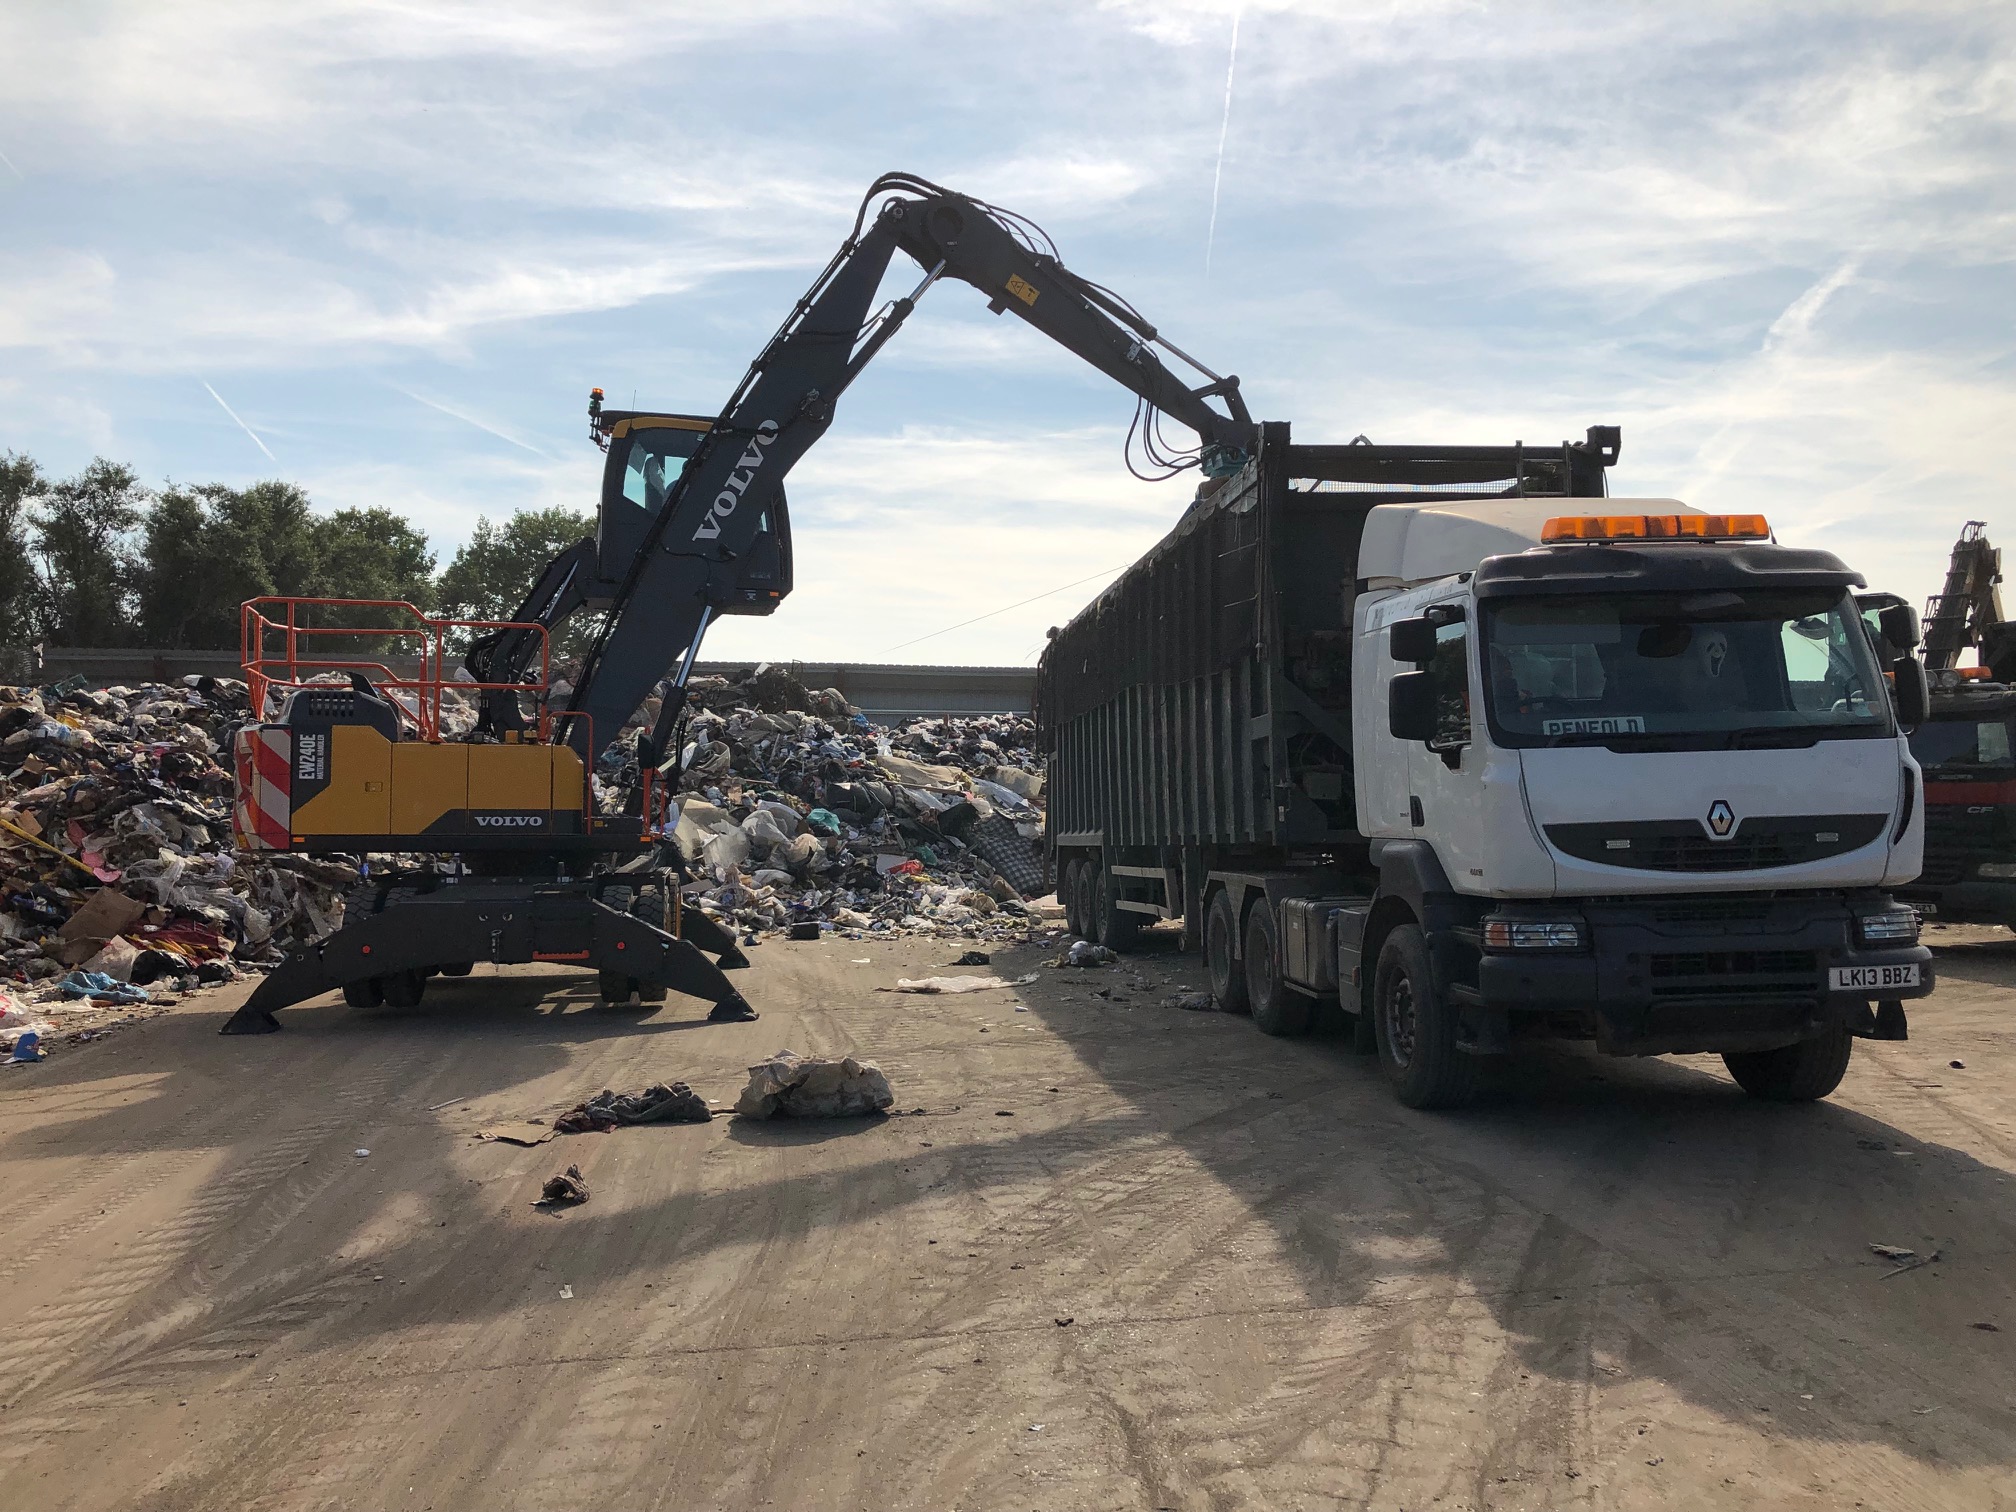 General Waste disposal in Essex, James Waste Rochfod Waste and Recycling